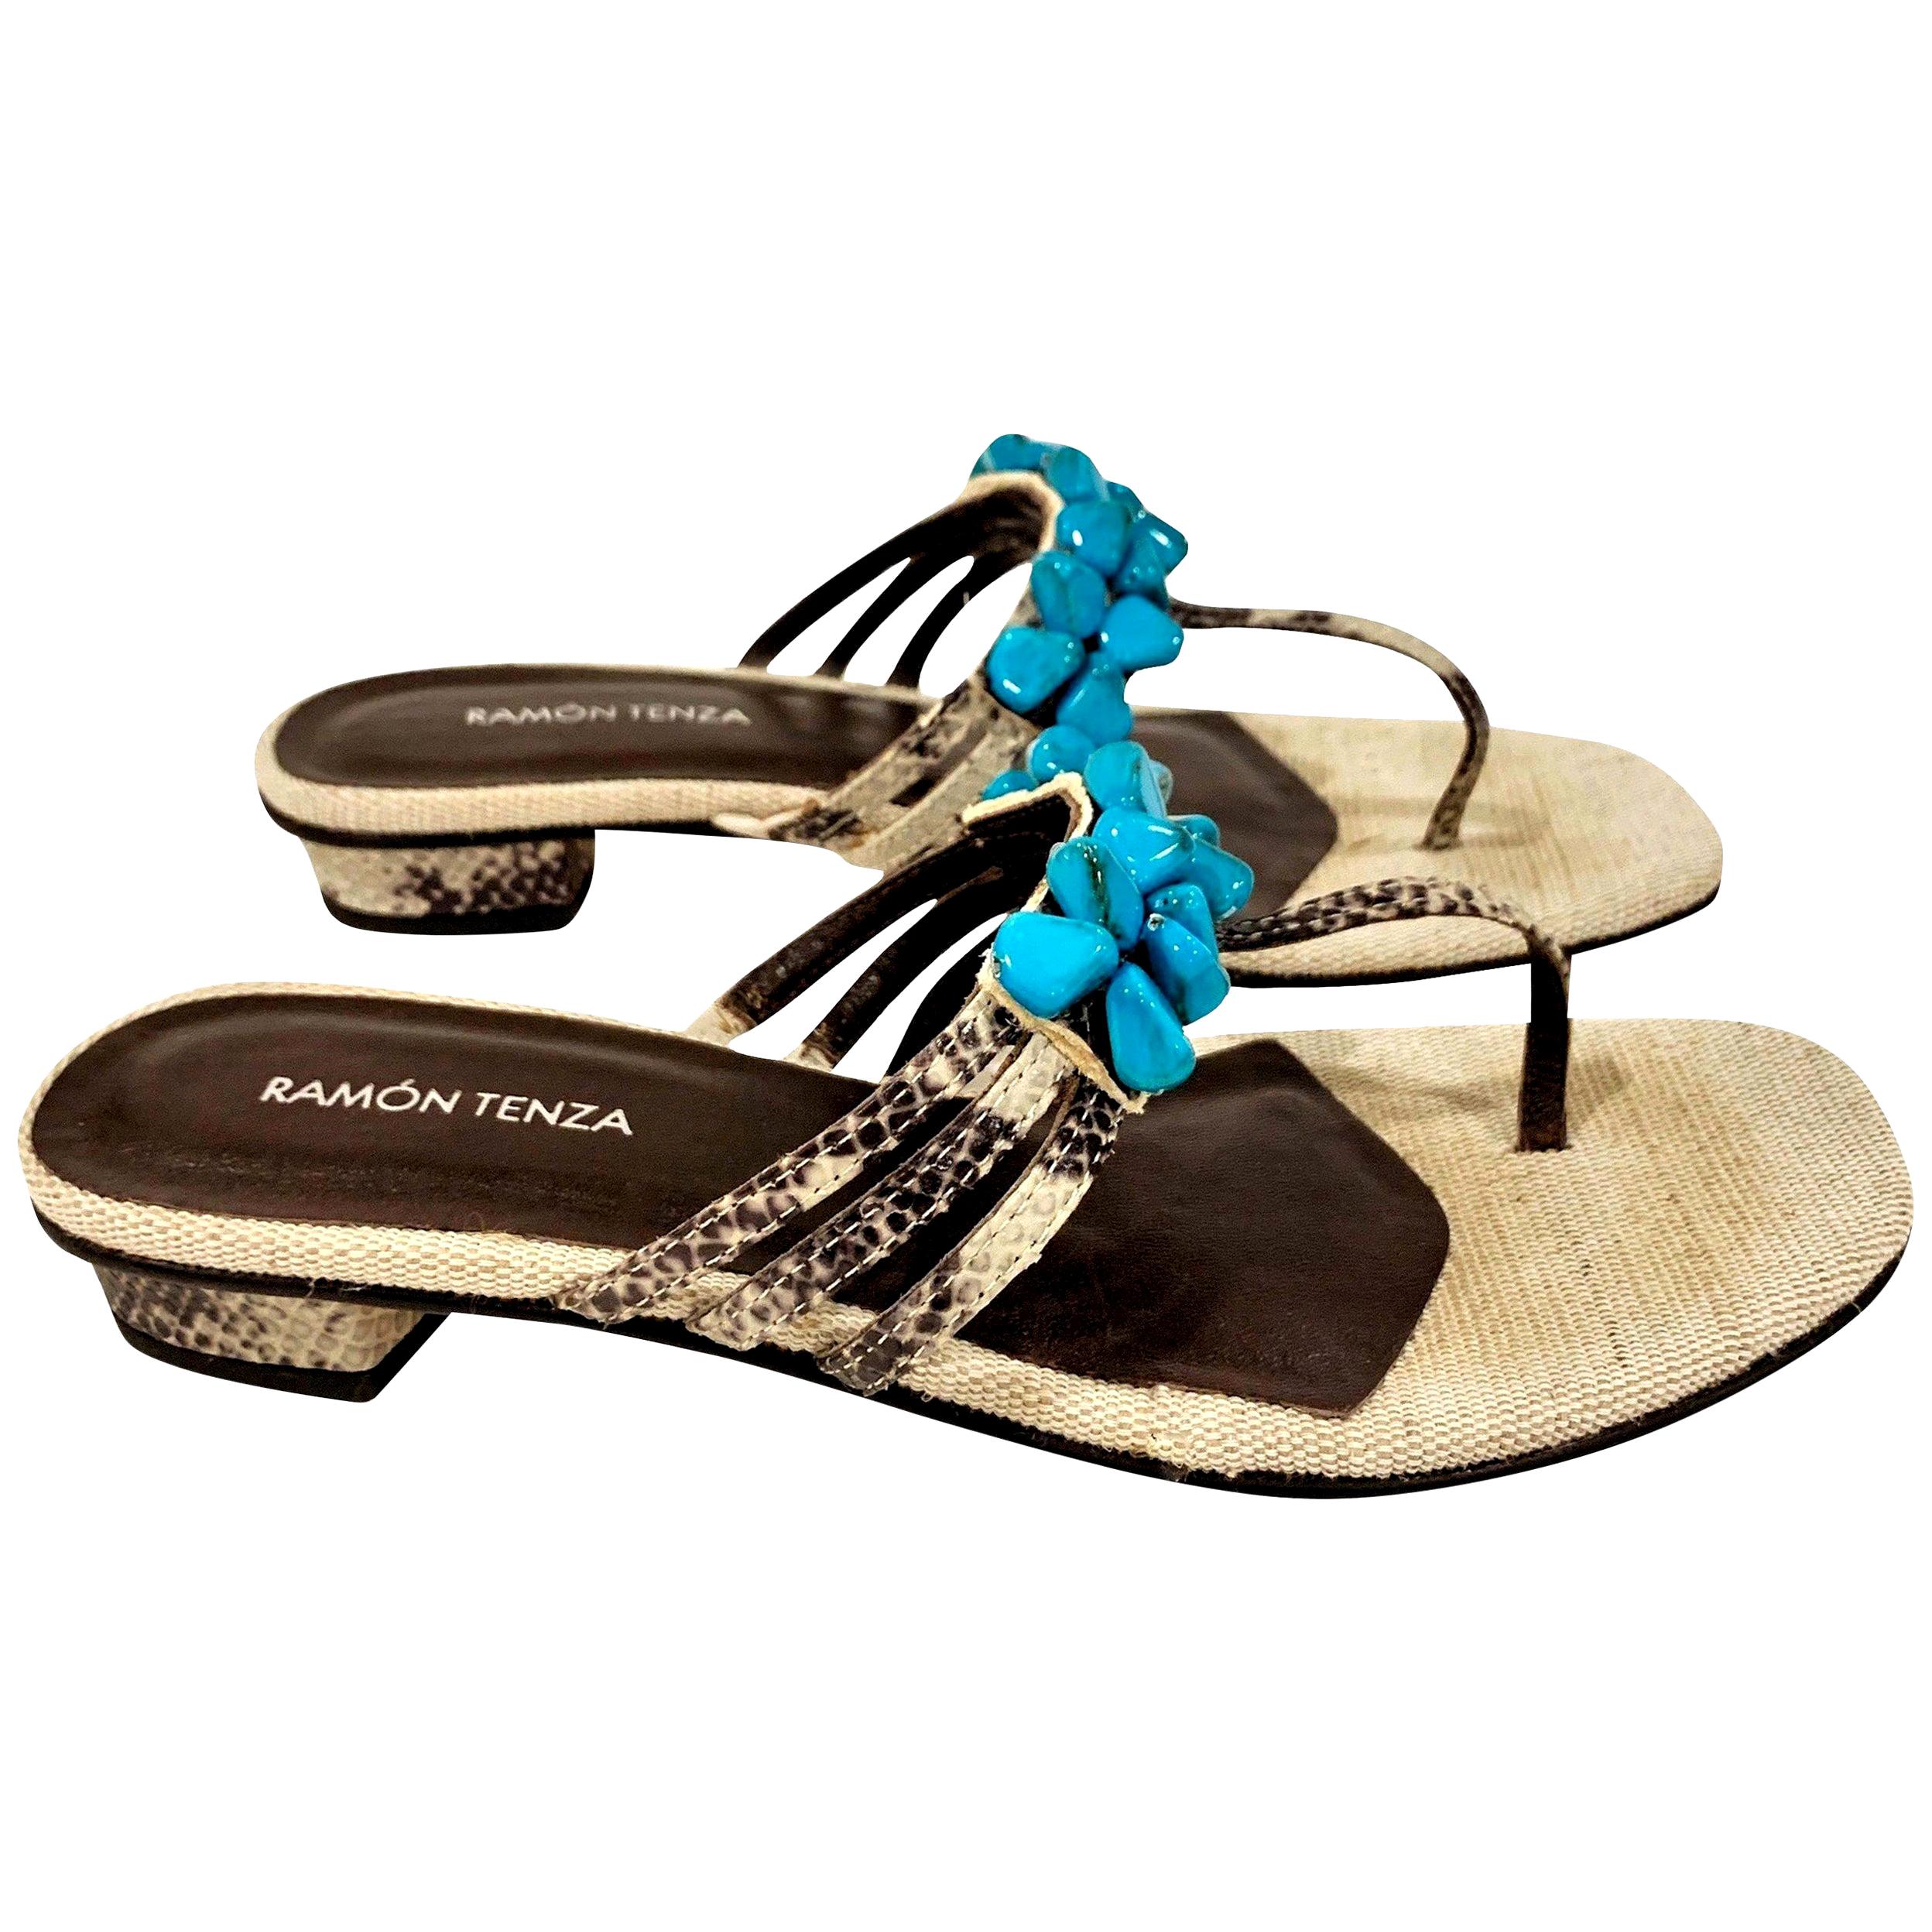 Ramon Tenza Spain
Brand New
Beige & Turquoise Thong Sandals
* Padded Leather Footbed
* Snakeskin Heel & Strap
* Faux Turquoise Beading
* Size: 8
* 1.25